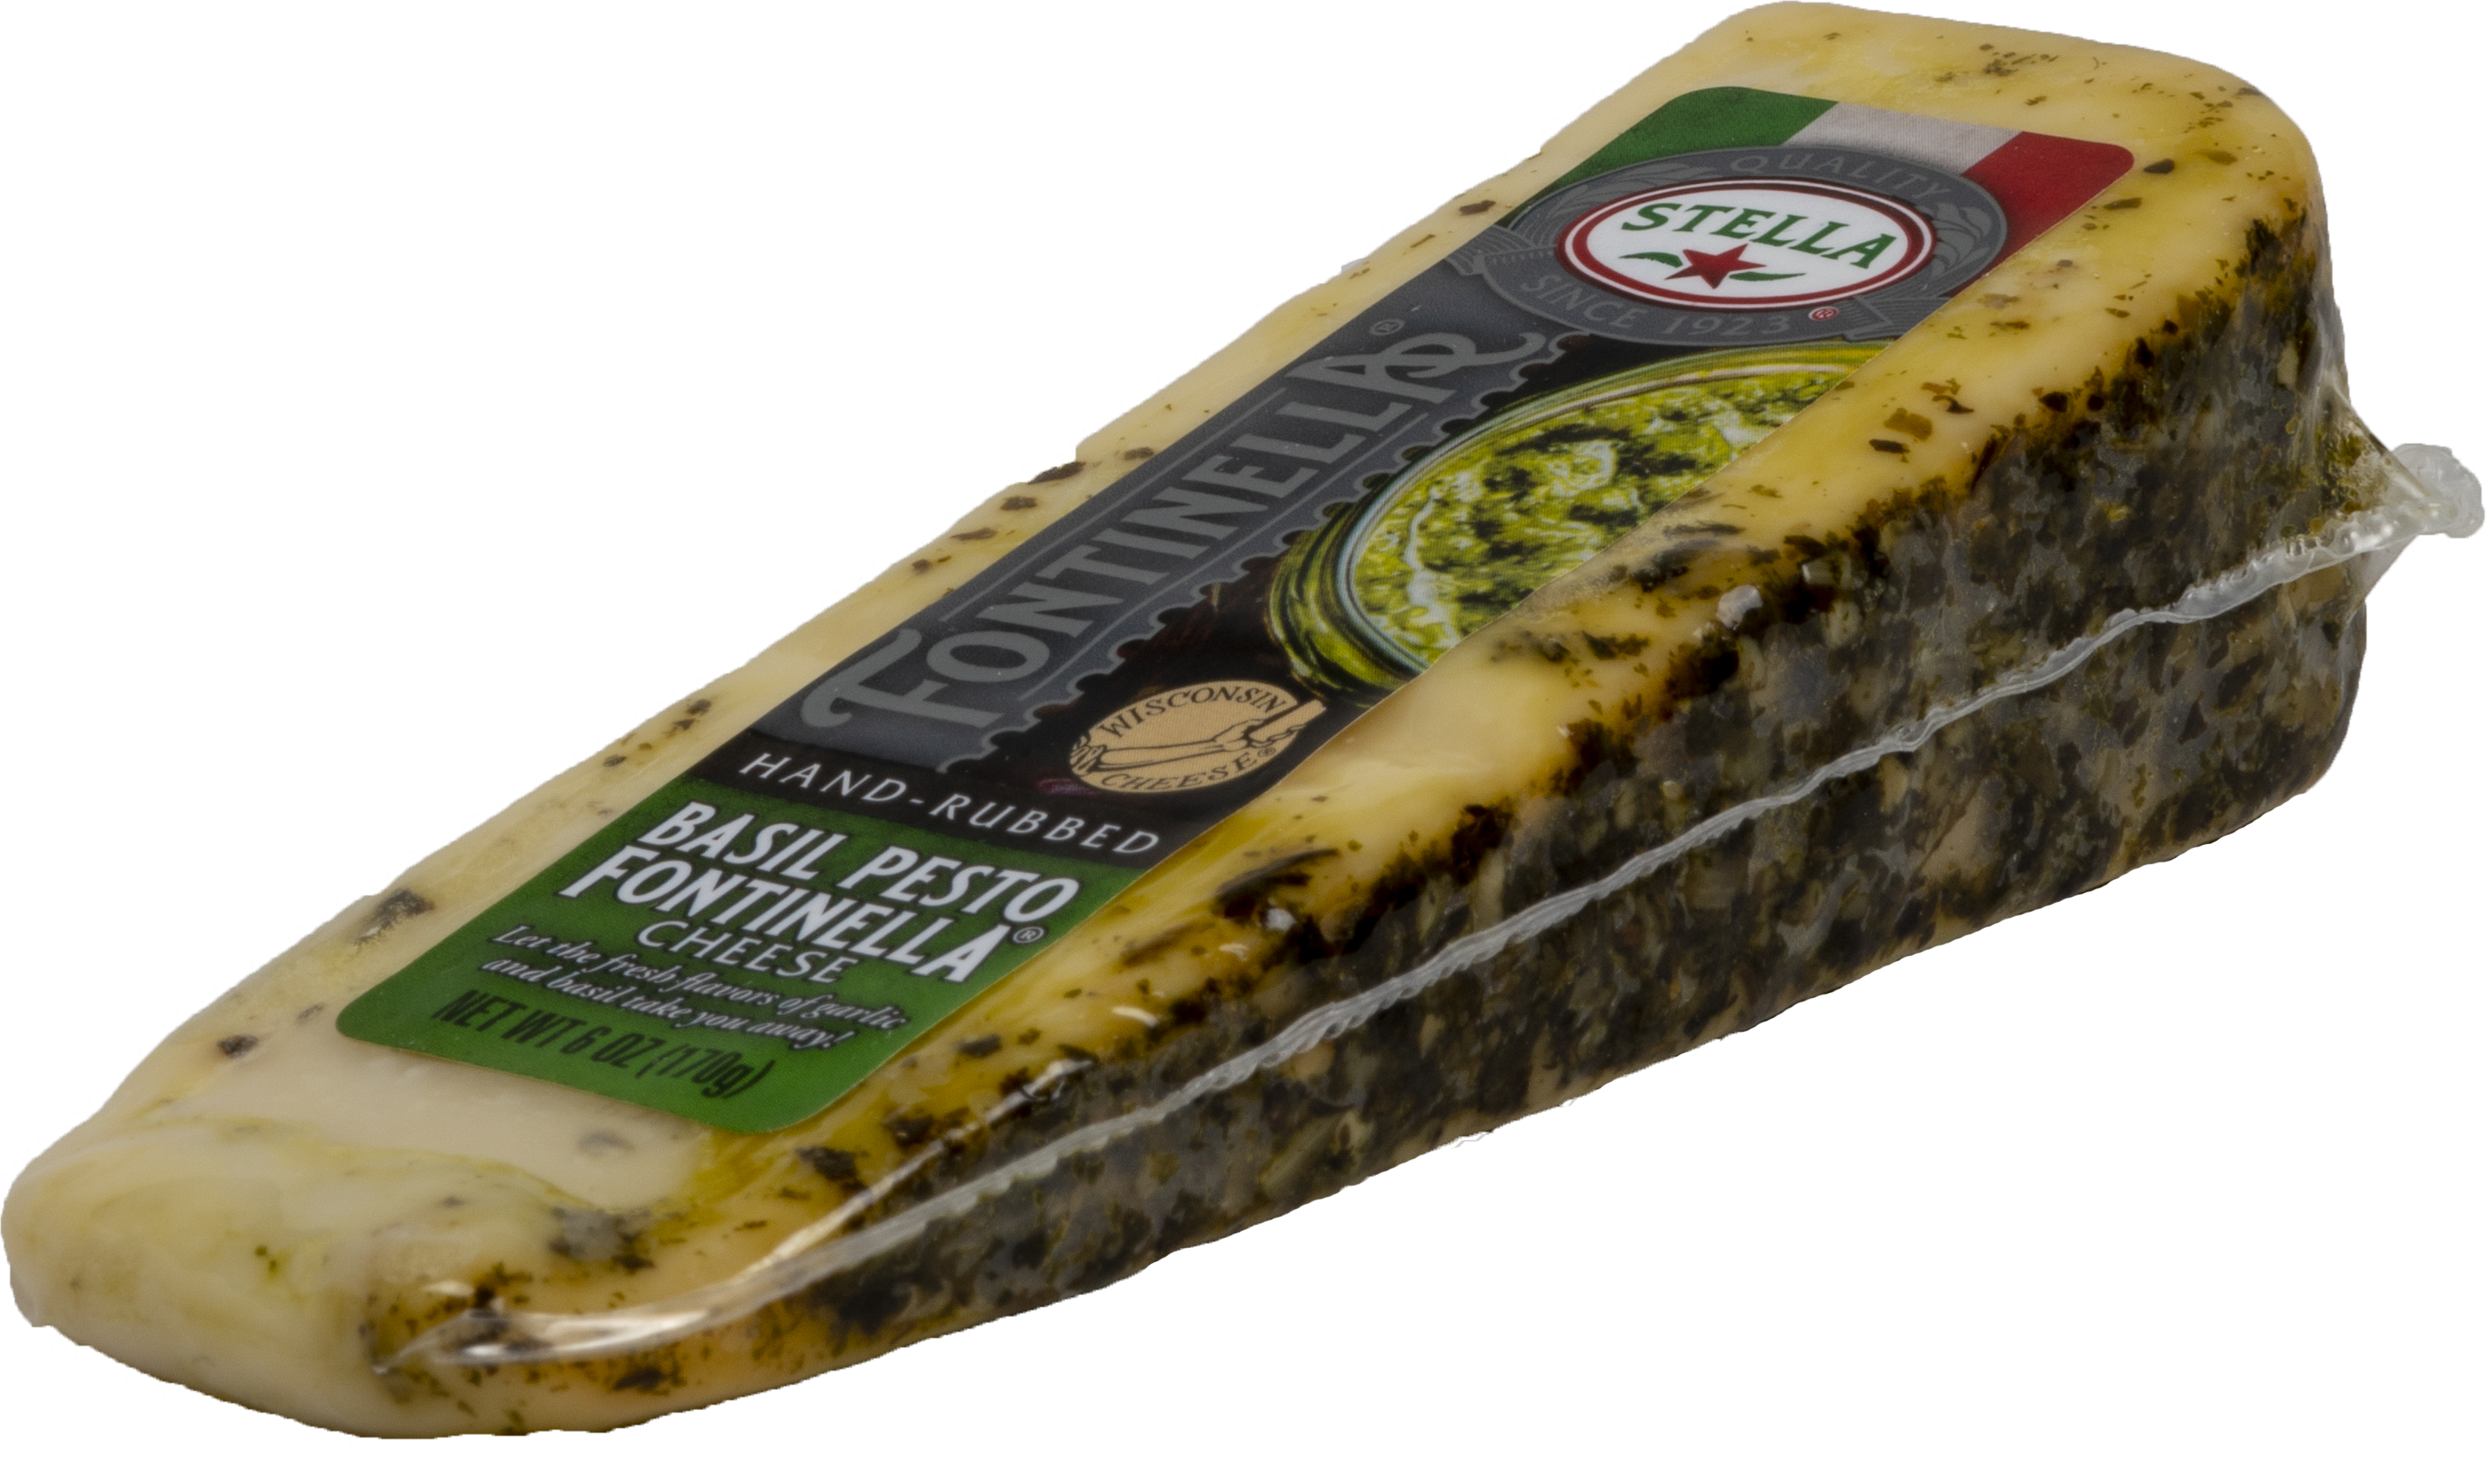 saputo rubbed cheese two sp